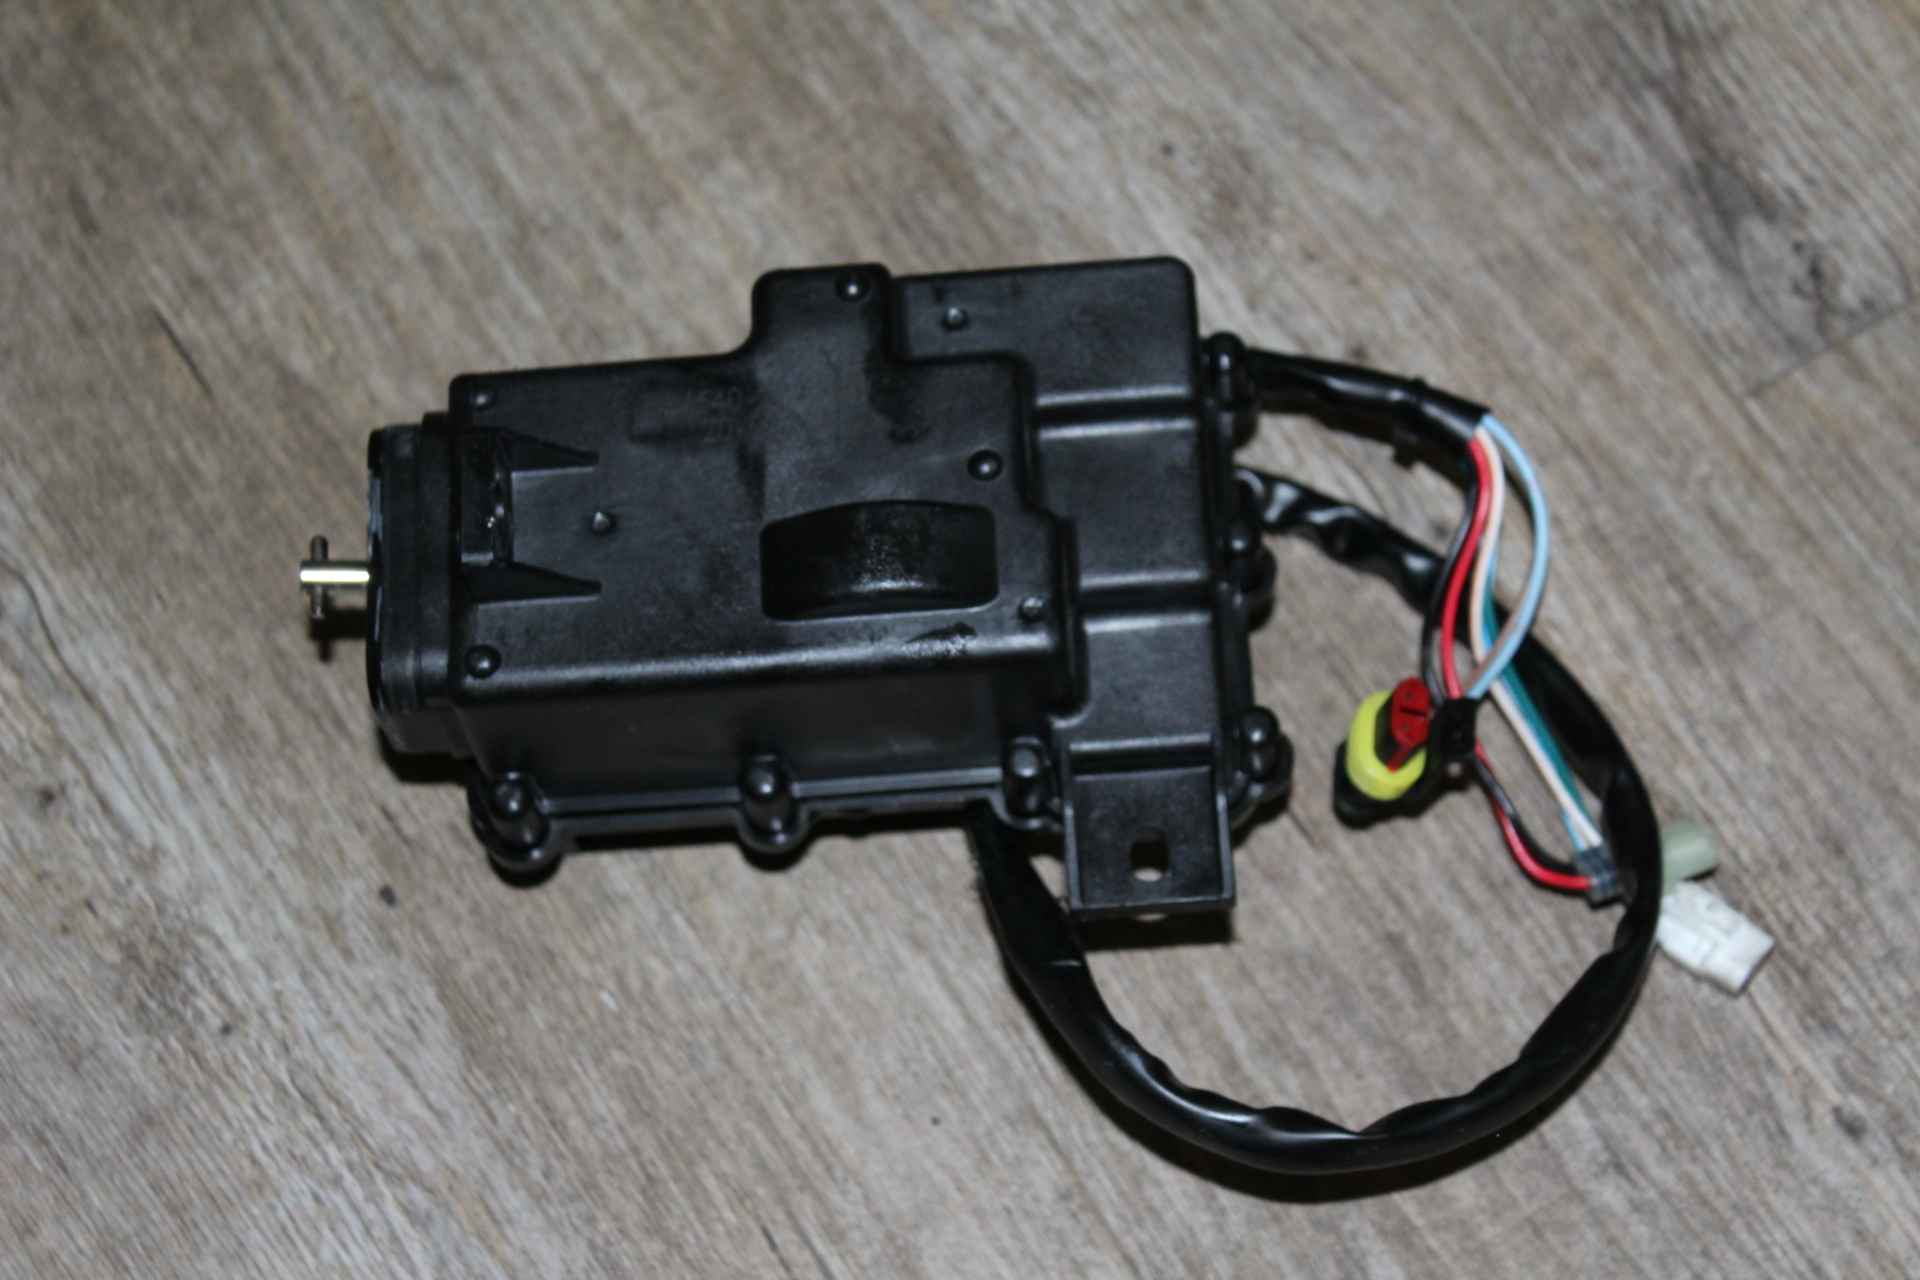 Picture of Access AMX 6.46 und Xtreme 650 Stellmotor Allrad